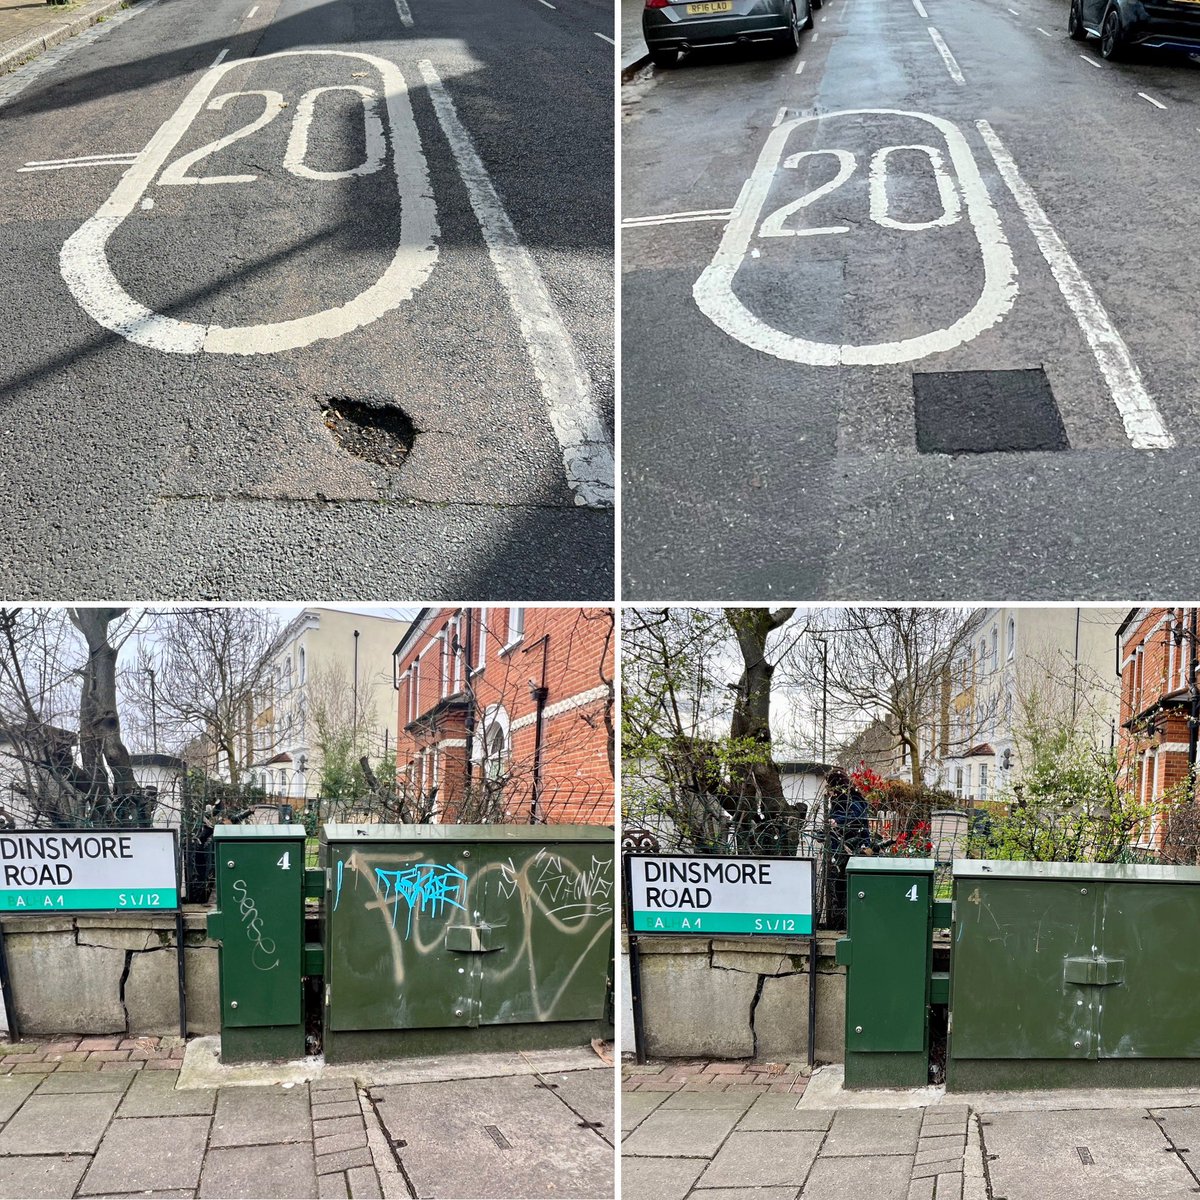 As well as representing #Balham and #ClaphamSouth residents at Wandsworth Townhall, holding councillor surgeries and local campaigning, @CllrDanHamilton and I also continue to deliver on our promise to keep Balham clean and safe. Some recent examples below. @CCACllrs @TeamLondon